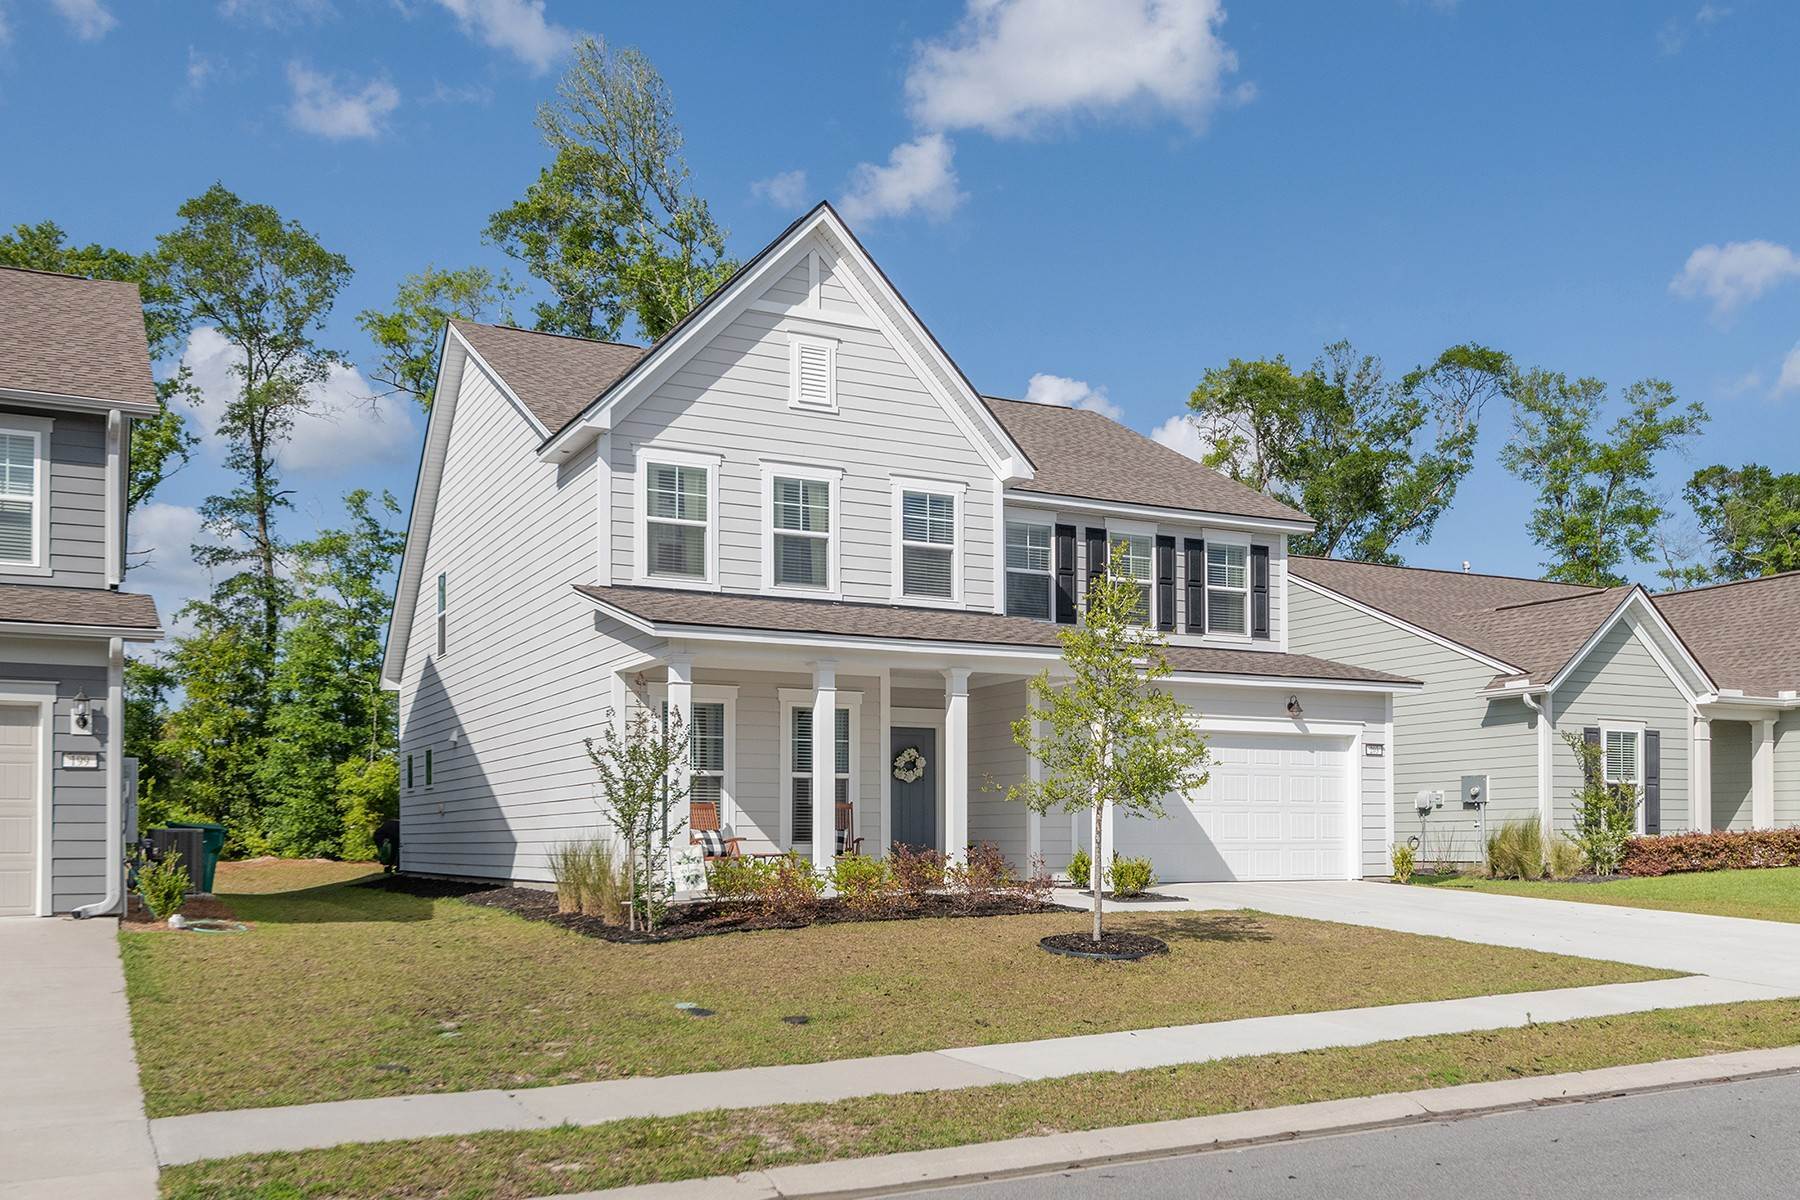 2. Single Family Homes for Sale at Classic Lowcountry Style At The Landings At New Riverside 203 Rudder Run Bluffton, South Carolina 29910 United States